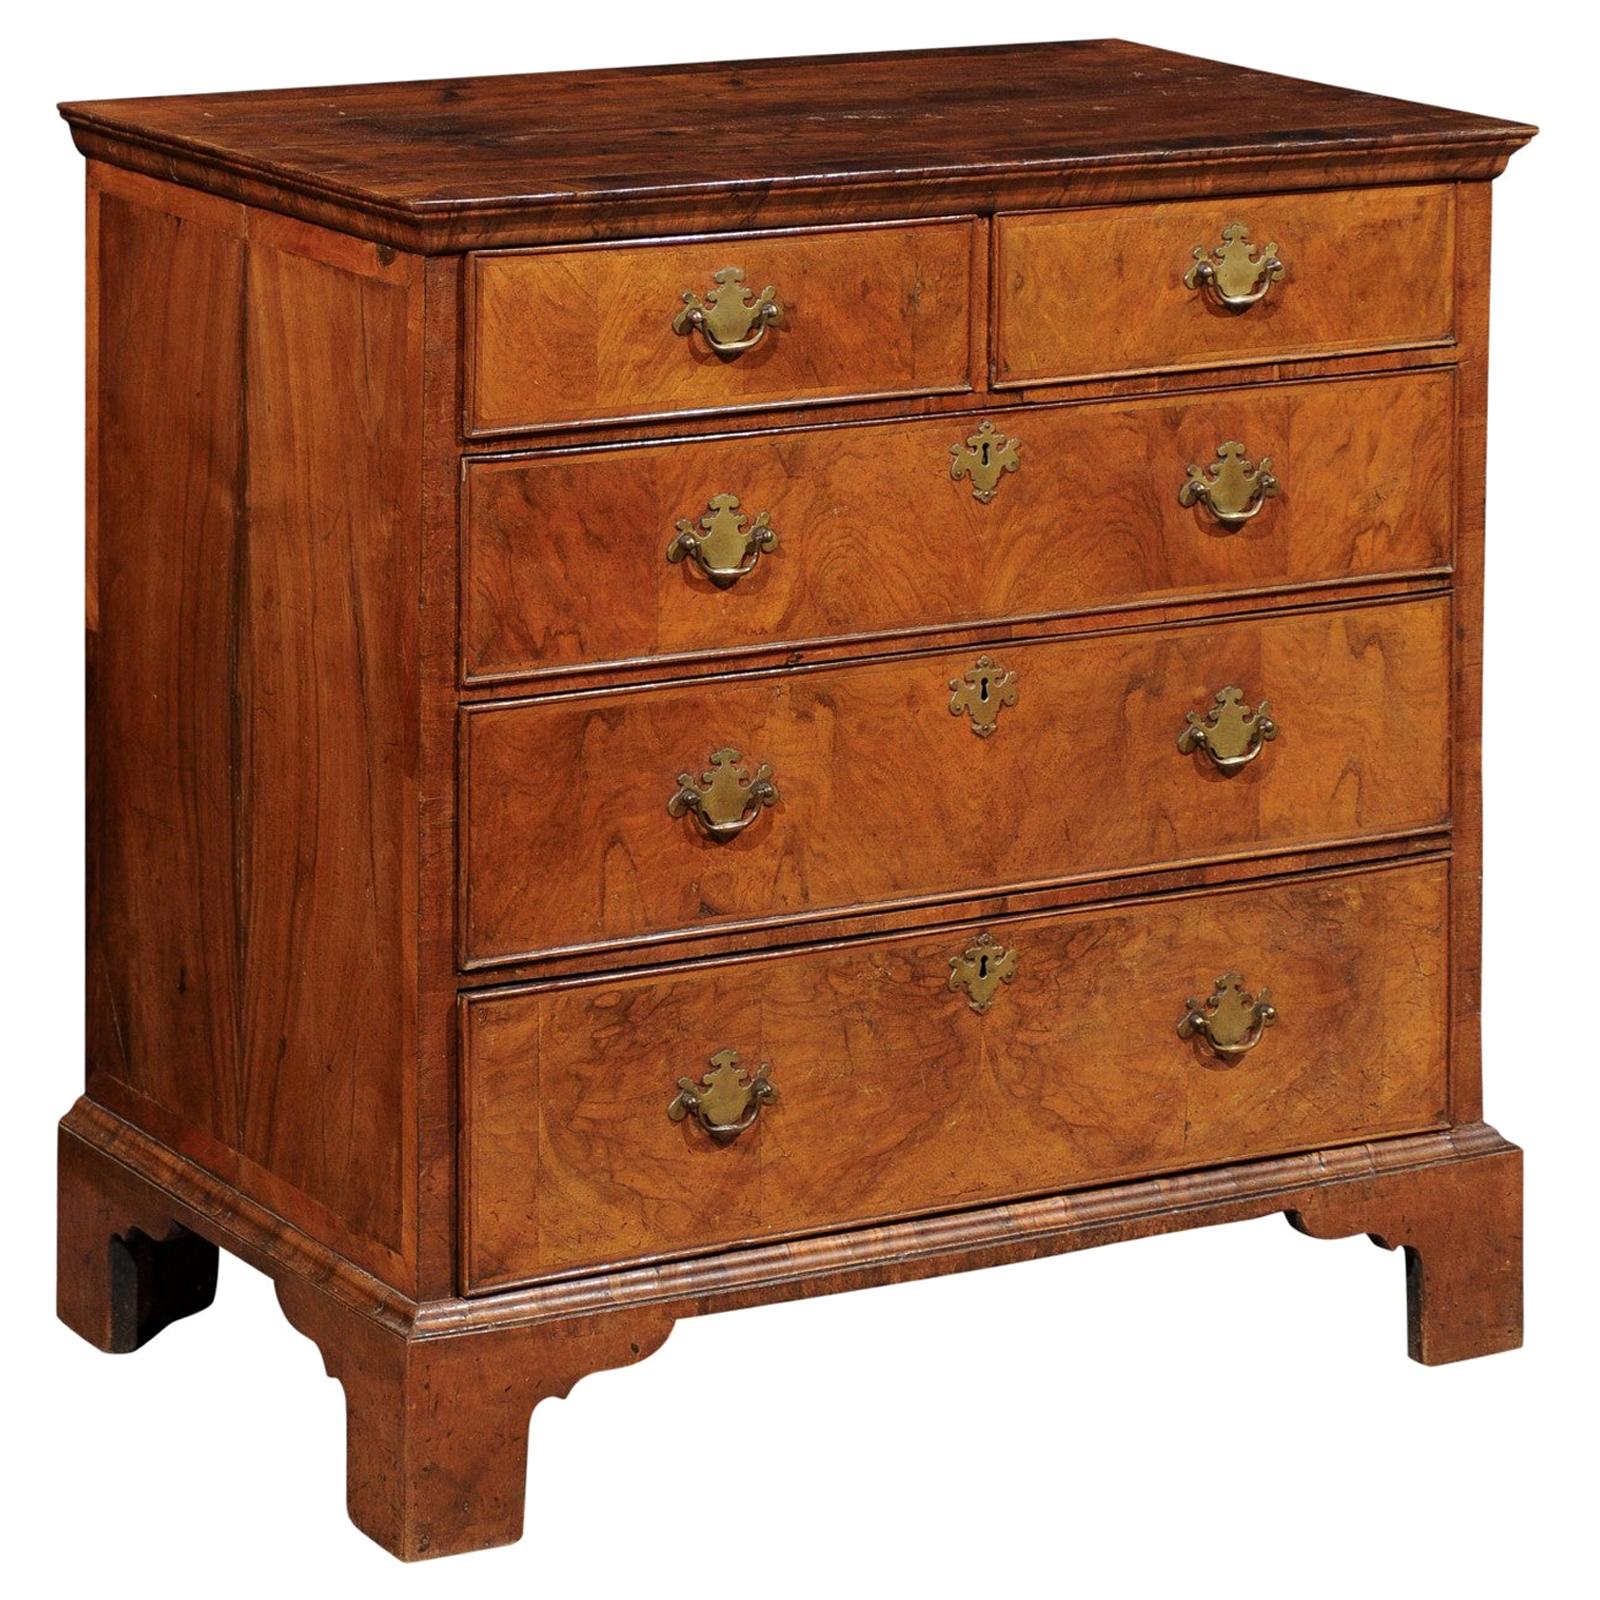 English Queen Anne Walnut Period Chest, Early 18th Century For Sale